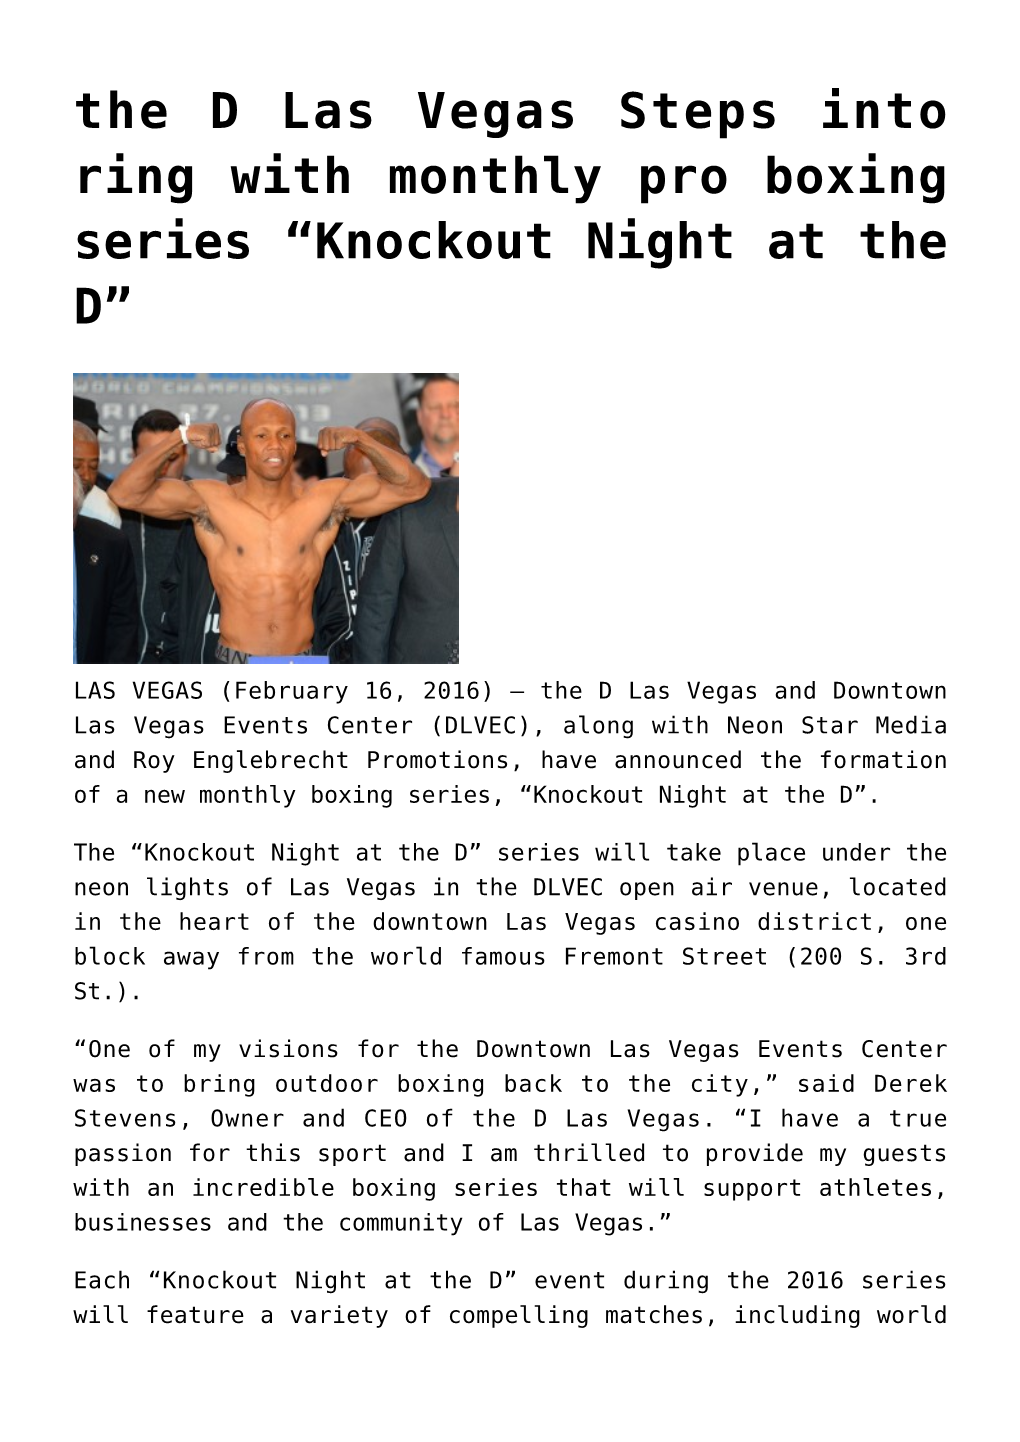 The D Las Vegas Steps Into Ring with Monthly Pro Boxing Series “Knockout Night at the D”